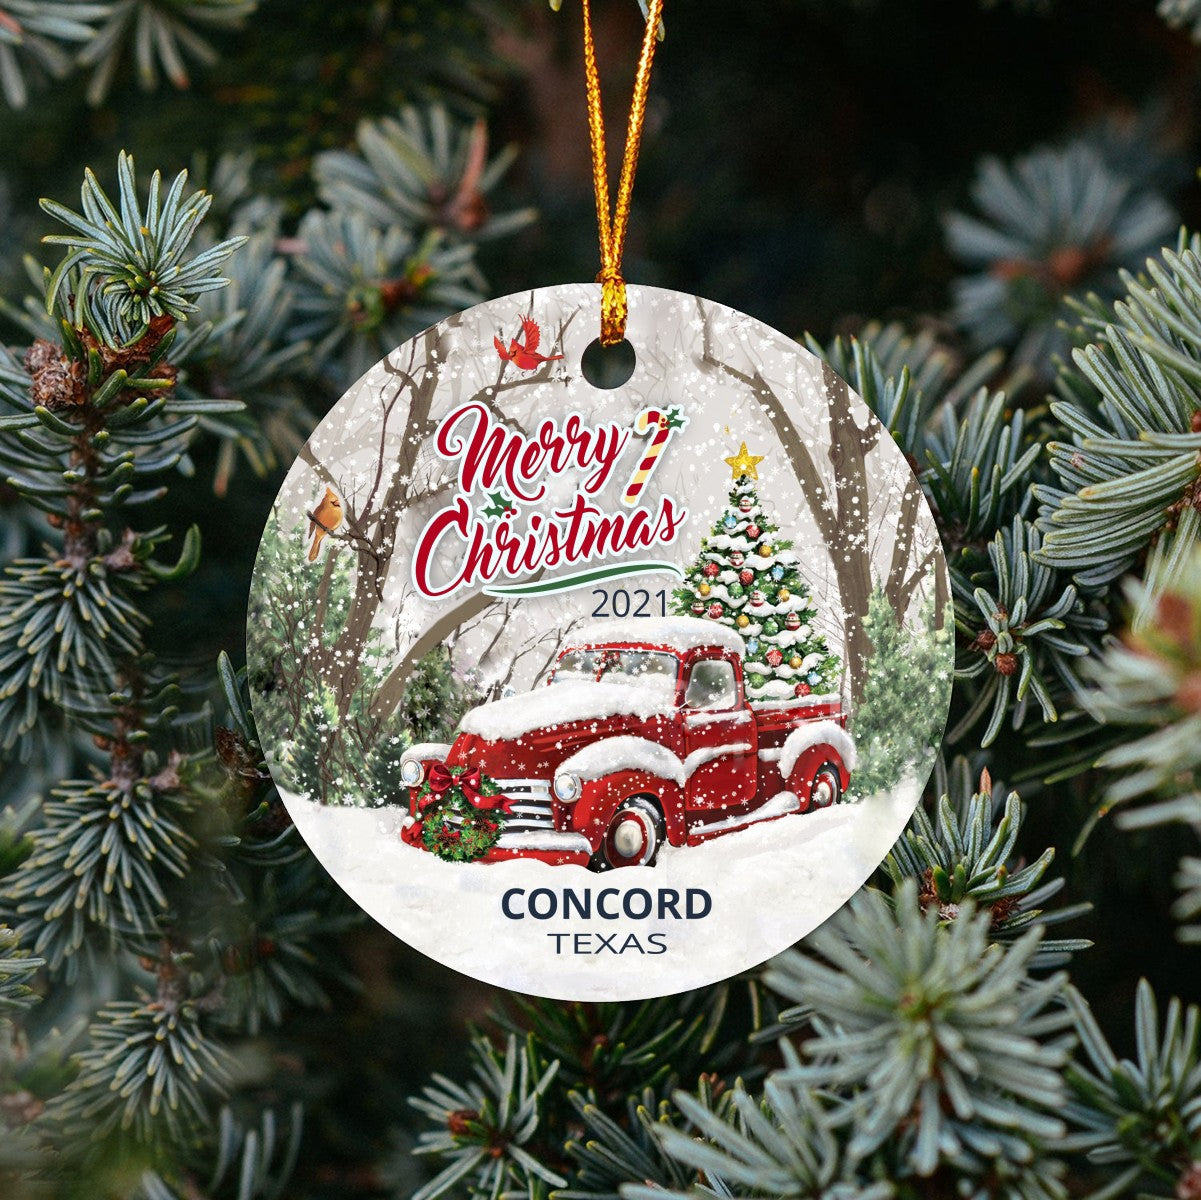 Christmas Tree Ornaments Concord - Ornament With Name City, State Concord Texas TX Ornament - Red Truck Xmas Ornaments 3'' Plastic Gift For Family, Friend And Housewarming